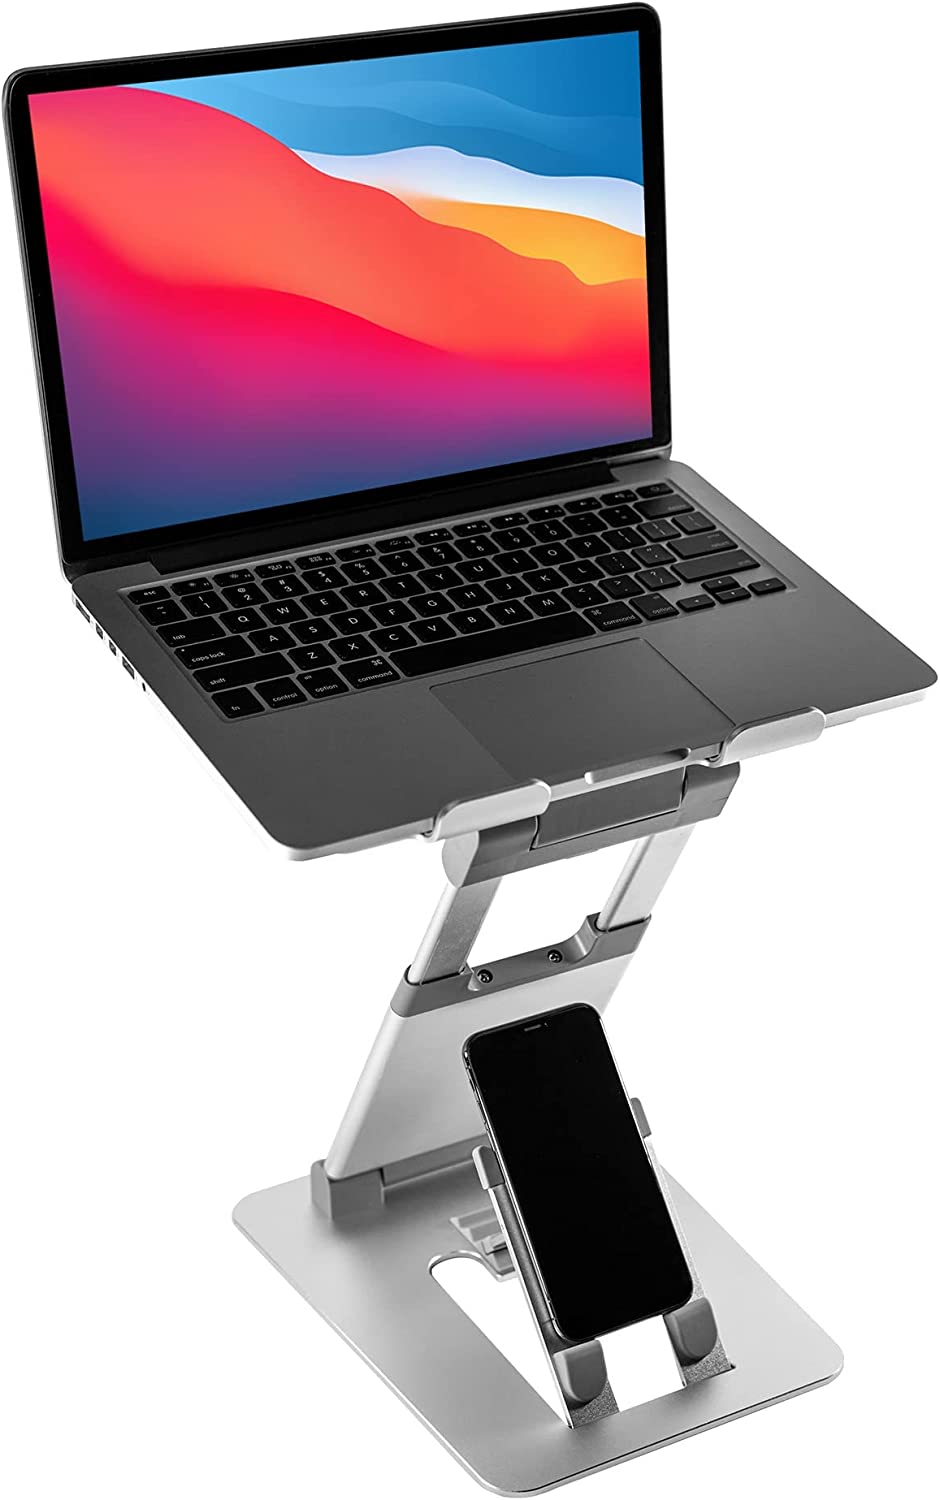 obVus Solutions Neck Pain Reduction Angled Laptop Stand